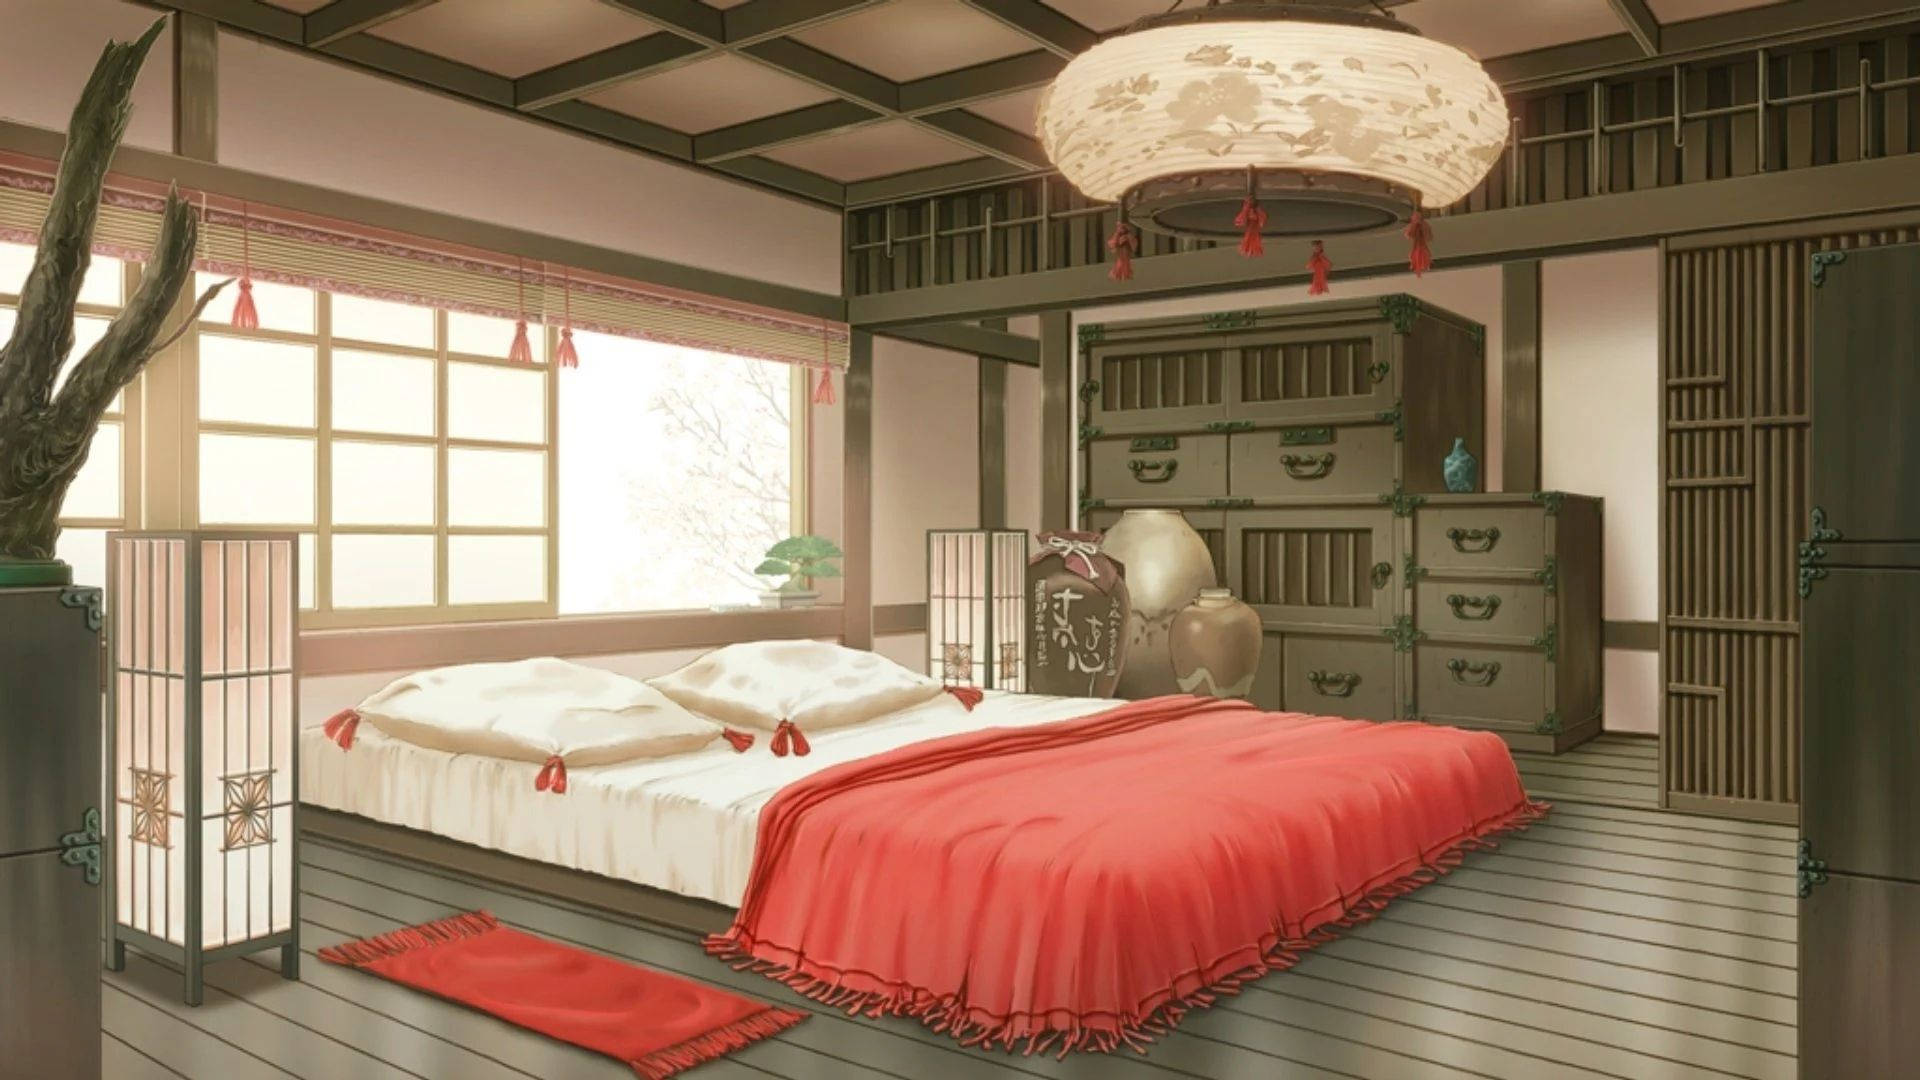 14 Best Anime Bedroom Design and Decor Ideas for Your Home 2023